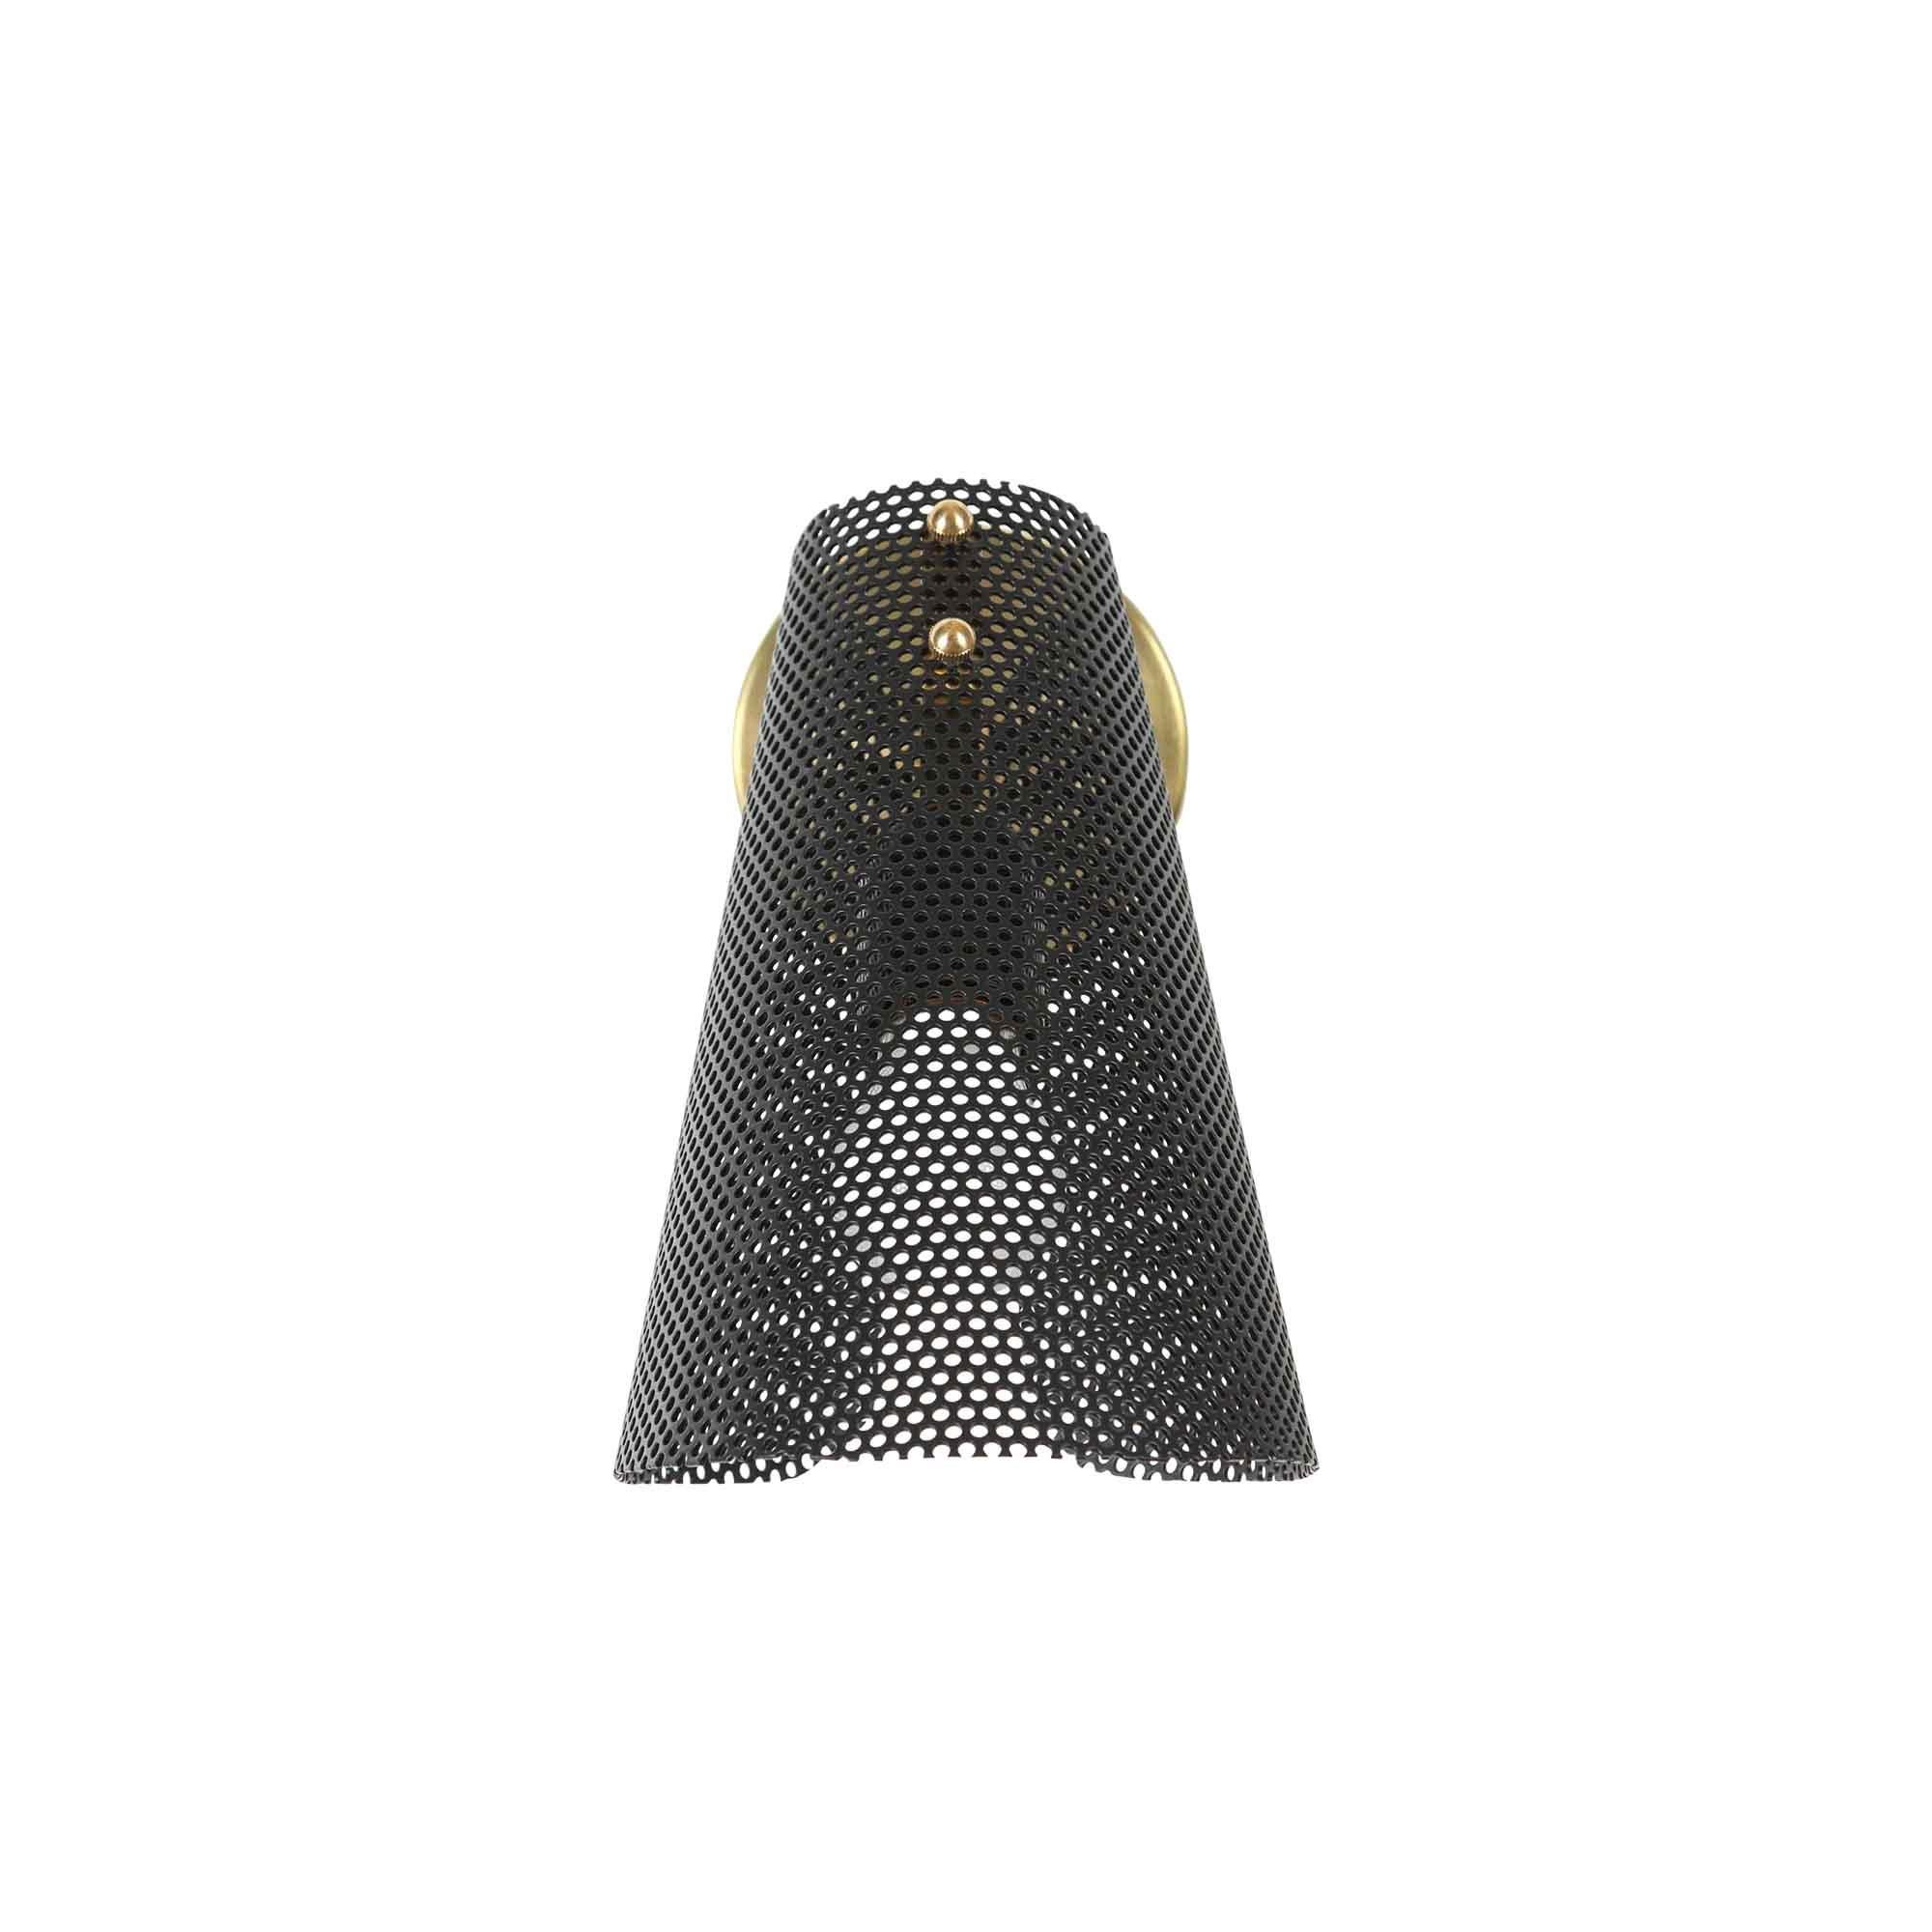 Black Perforated scoop sconce by Lawson-Fenning. The Scoop Perforated Sconce features a perforated shade and brass hardware.

The Lawson-Fenning Collection is designed and handmade in Los Angeles, California. Reach out to discover what options are